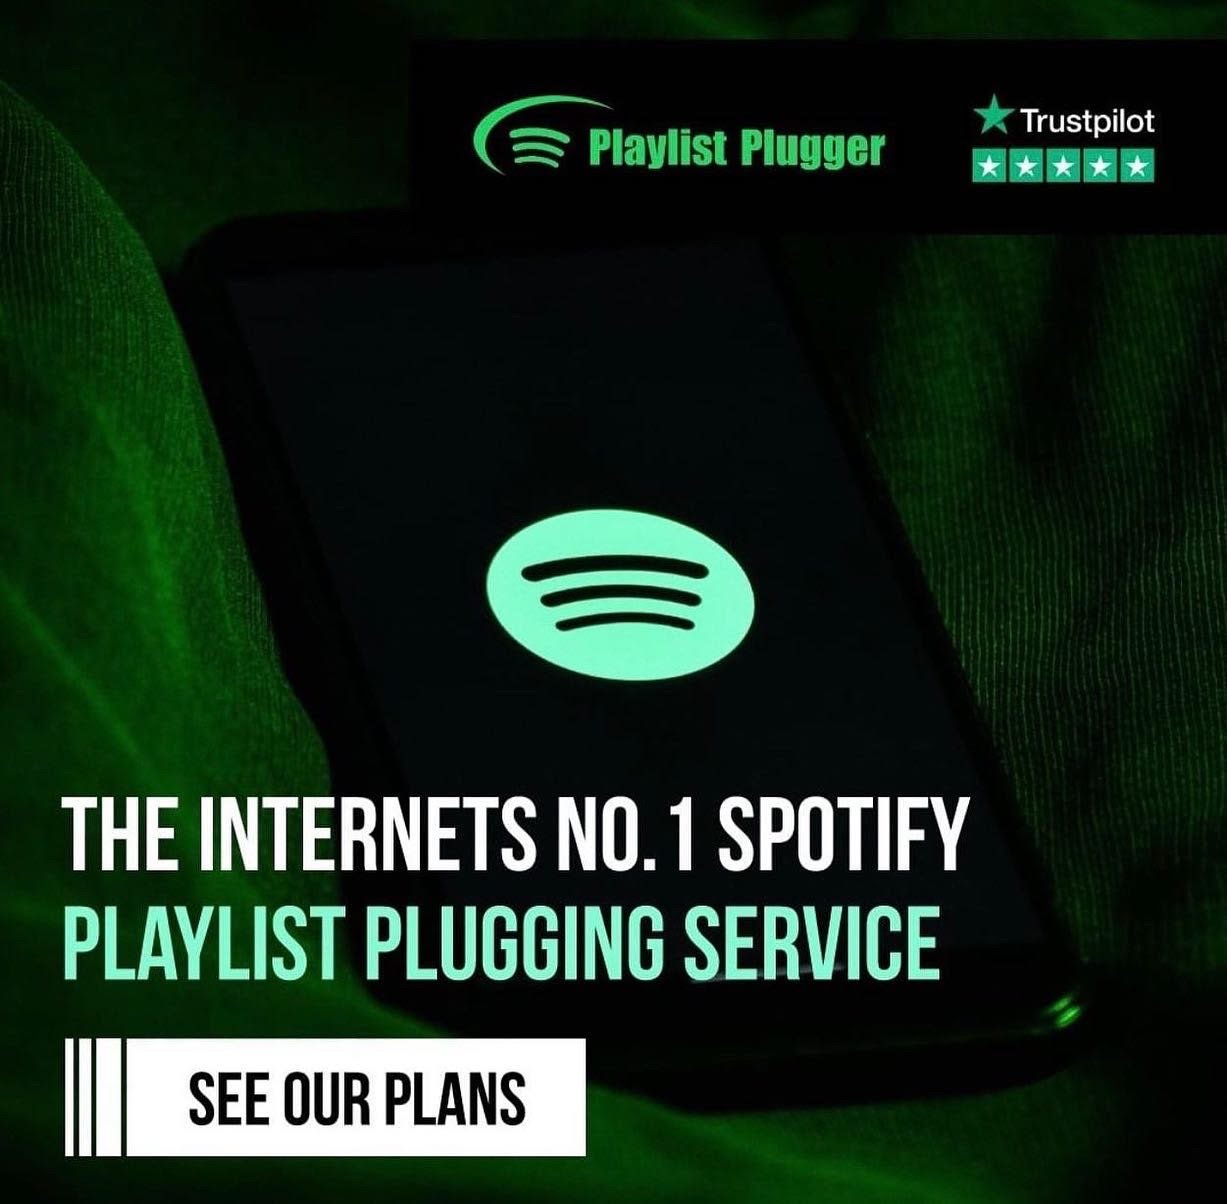 The Best Affordable Spotify Track Plugger To Help Songwriters Get More Listeners